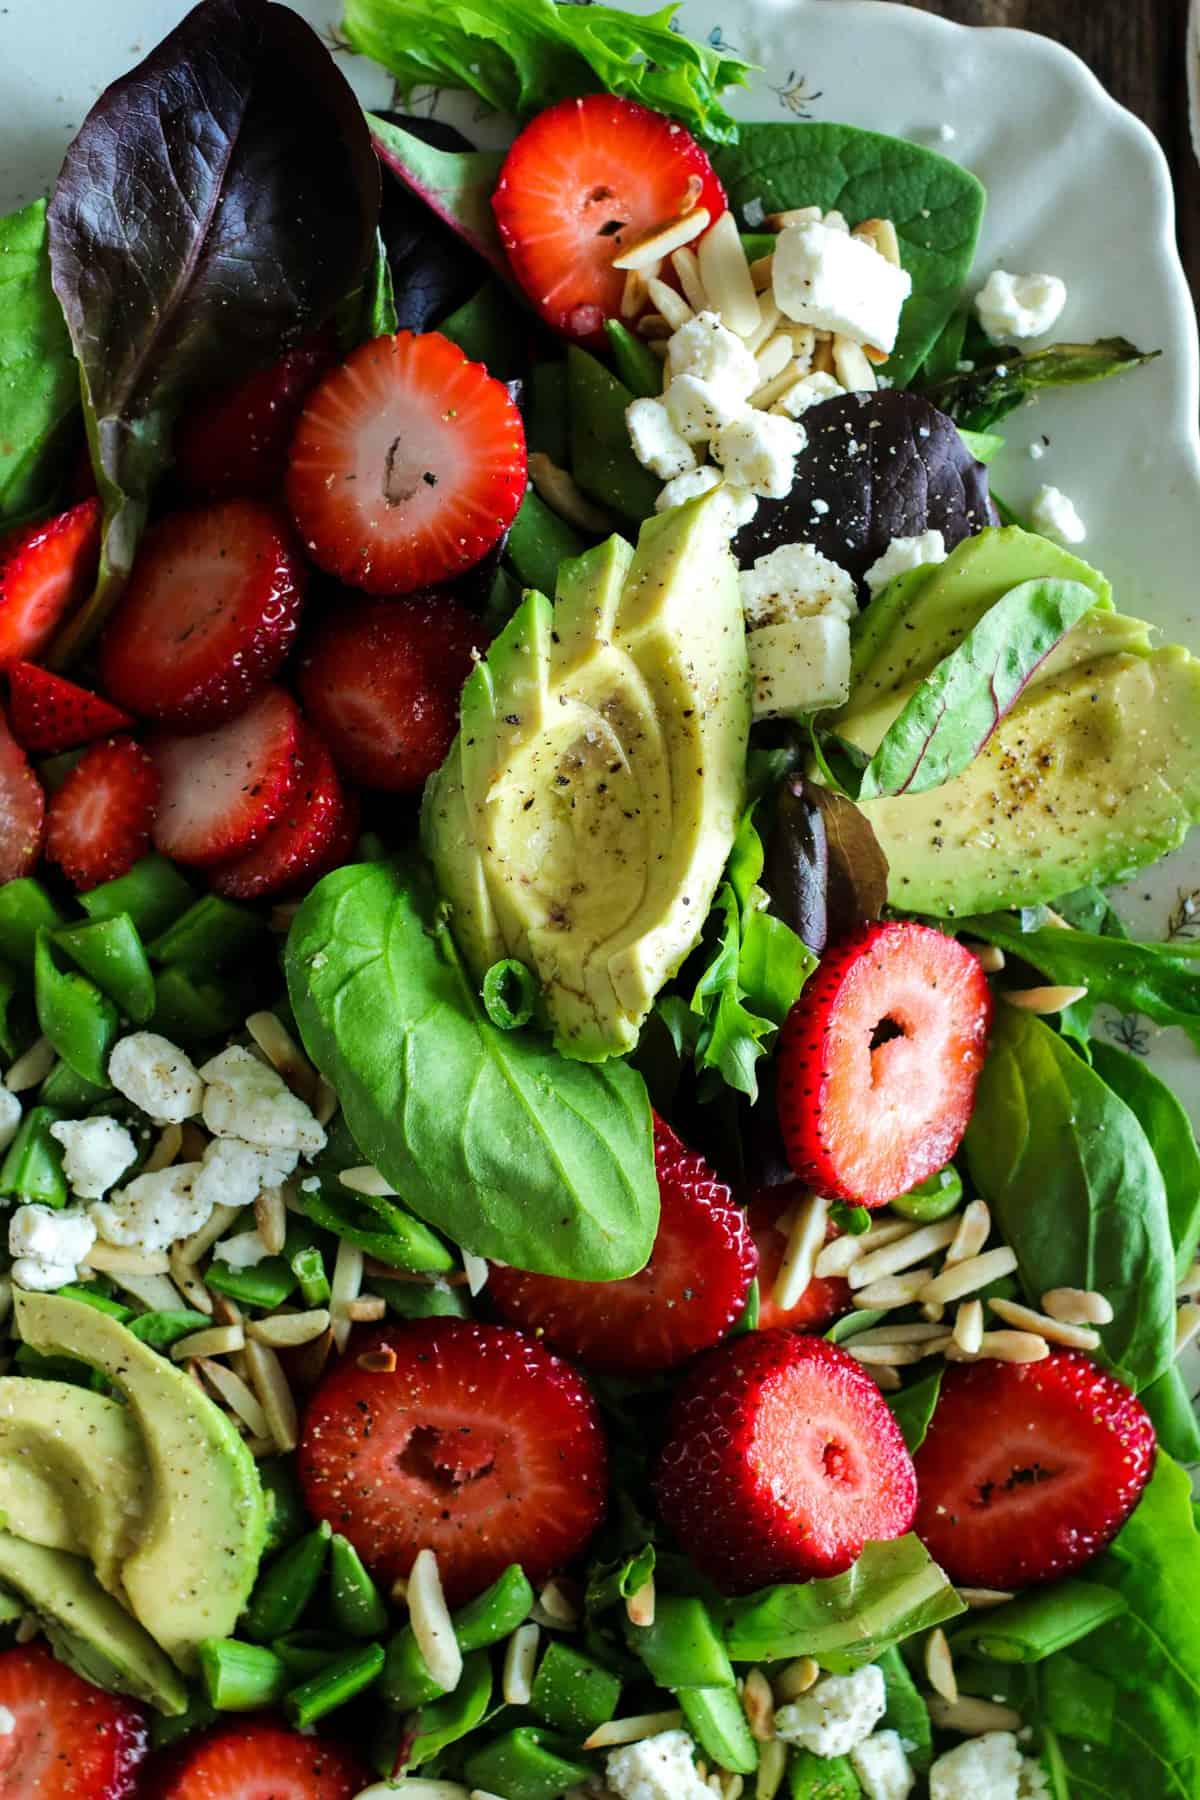 Salad of baby greens, sliced strawberries, avocado, snap peas, toasted almonds, and feta with a strawberry poppyseed dressing.